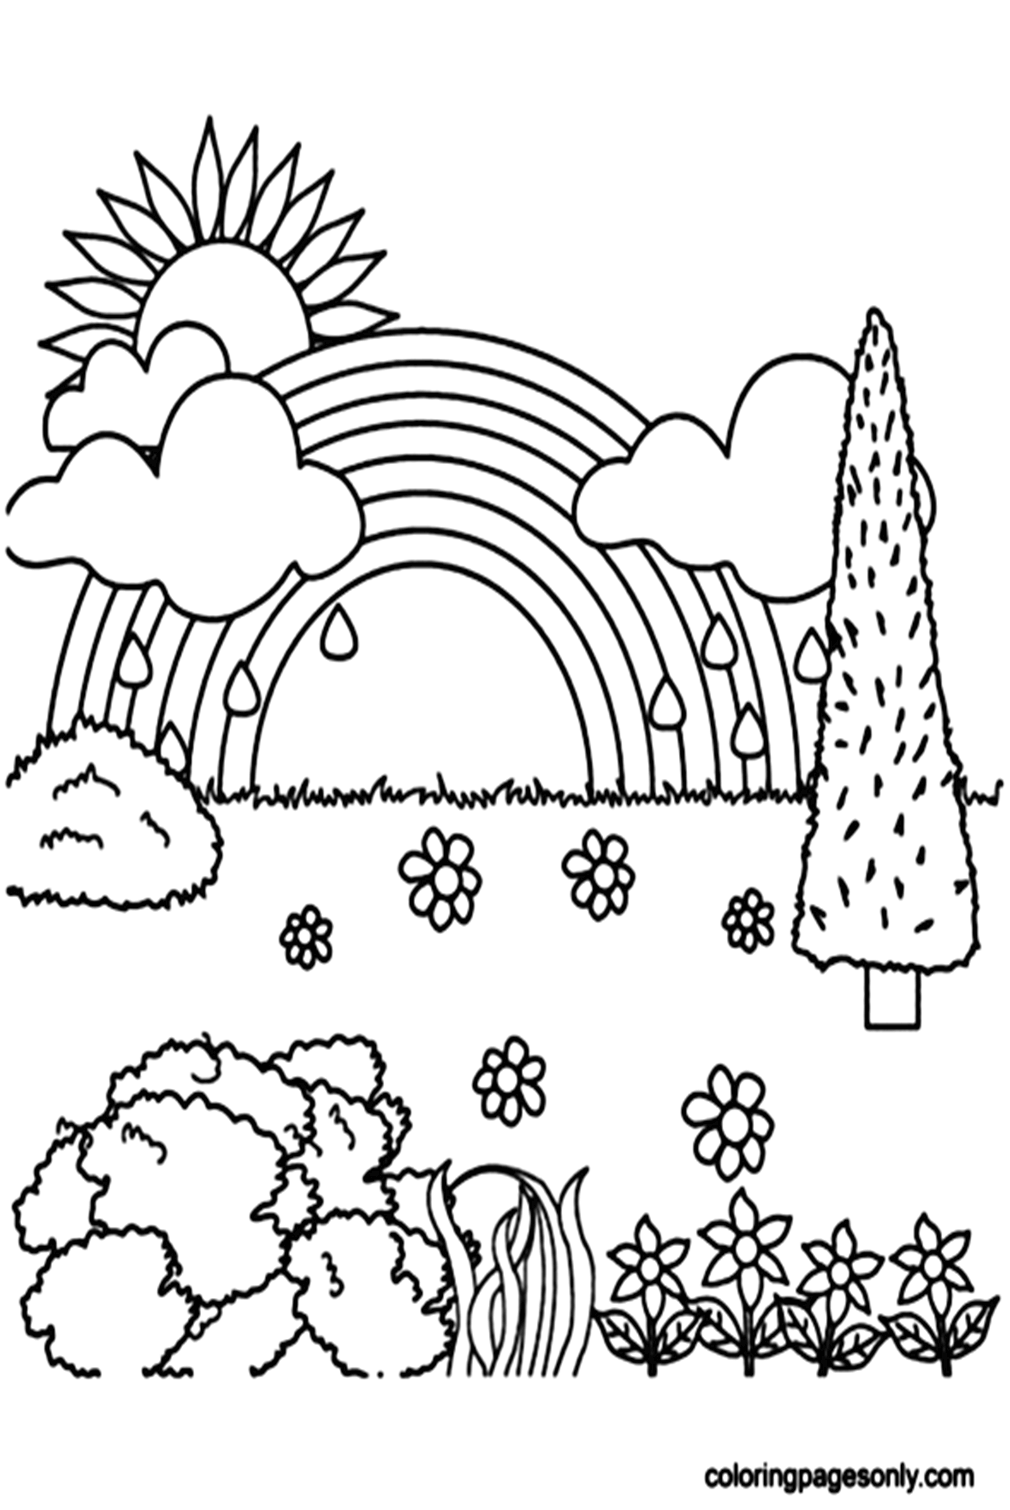 Rainbow Dreamland Coloring Pages